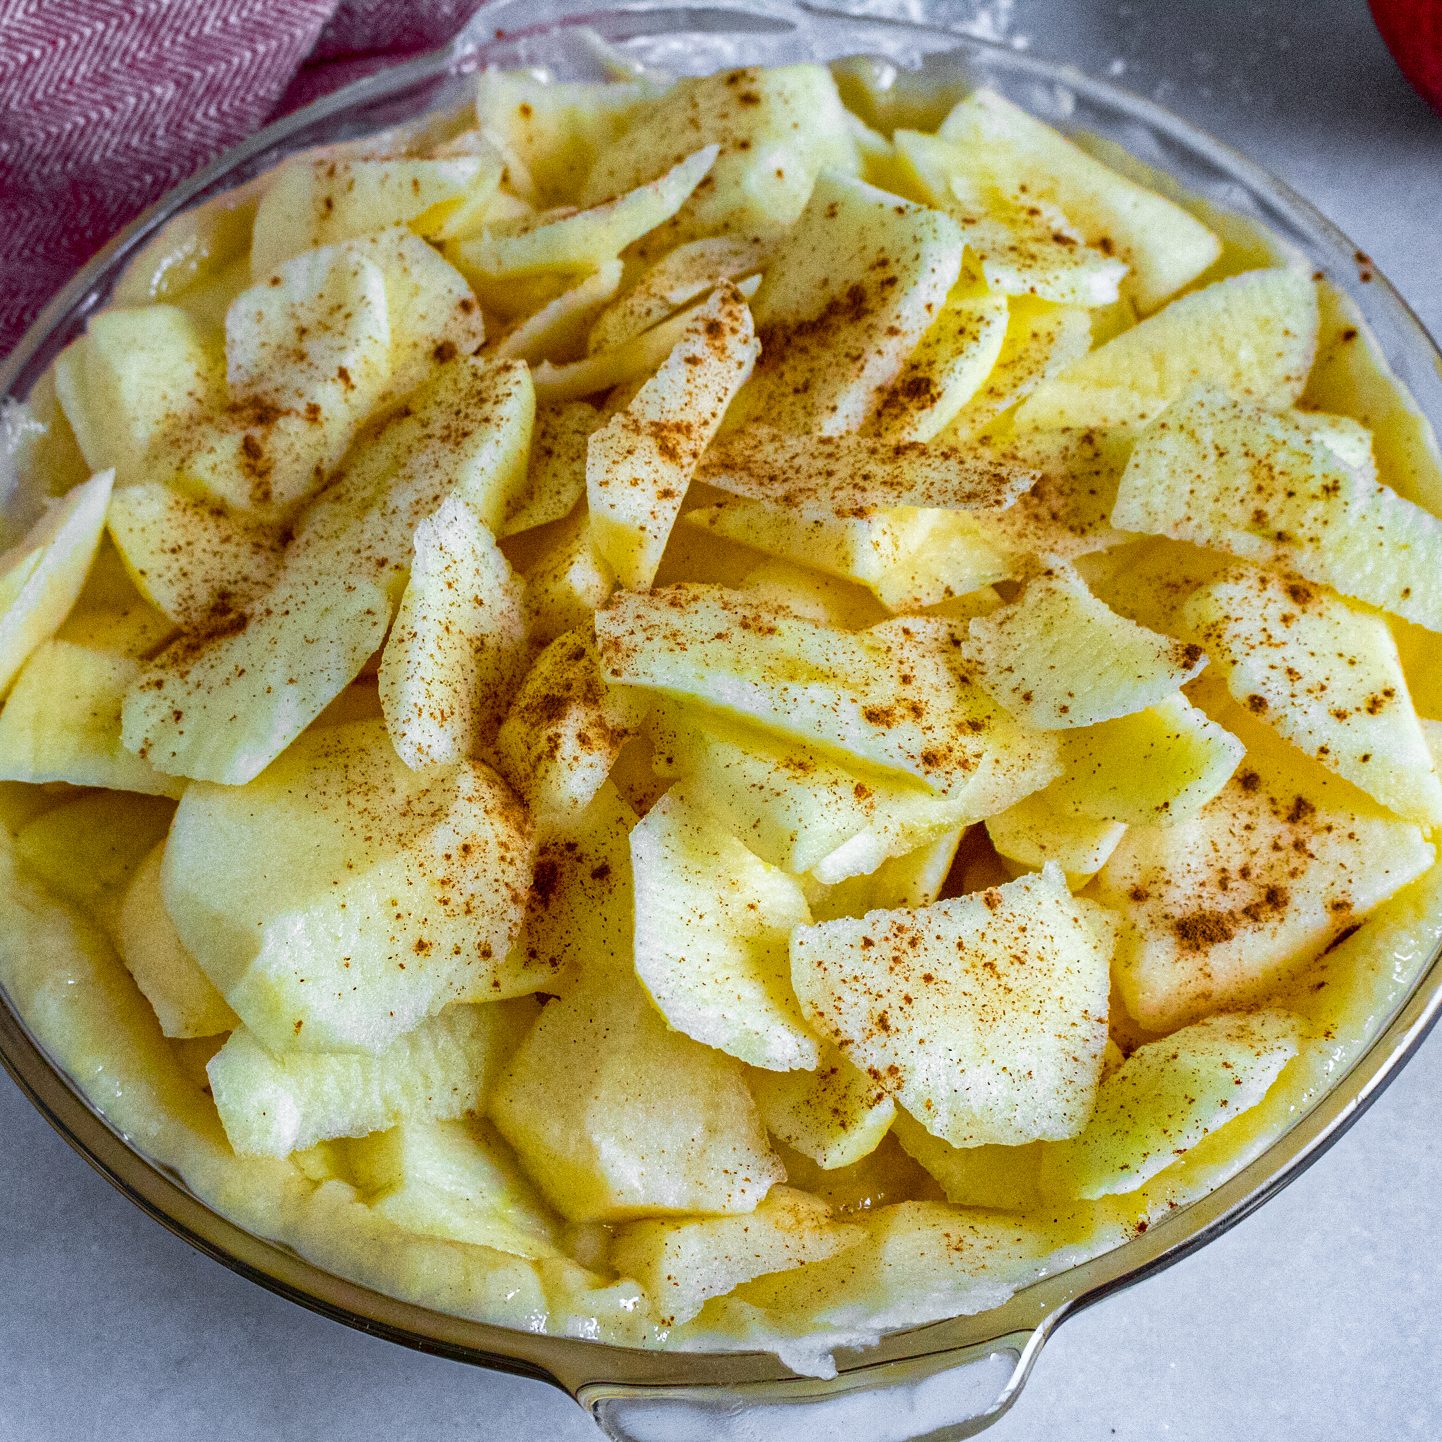 Fill pie shell with apples and dust them with cinnamon. Crumble the rest of the dough over the top of apples until they are more or less covered evenly.